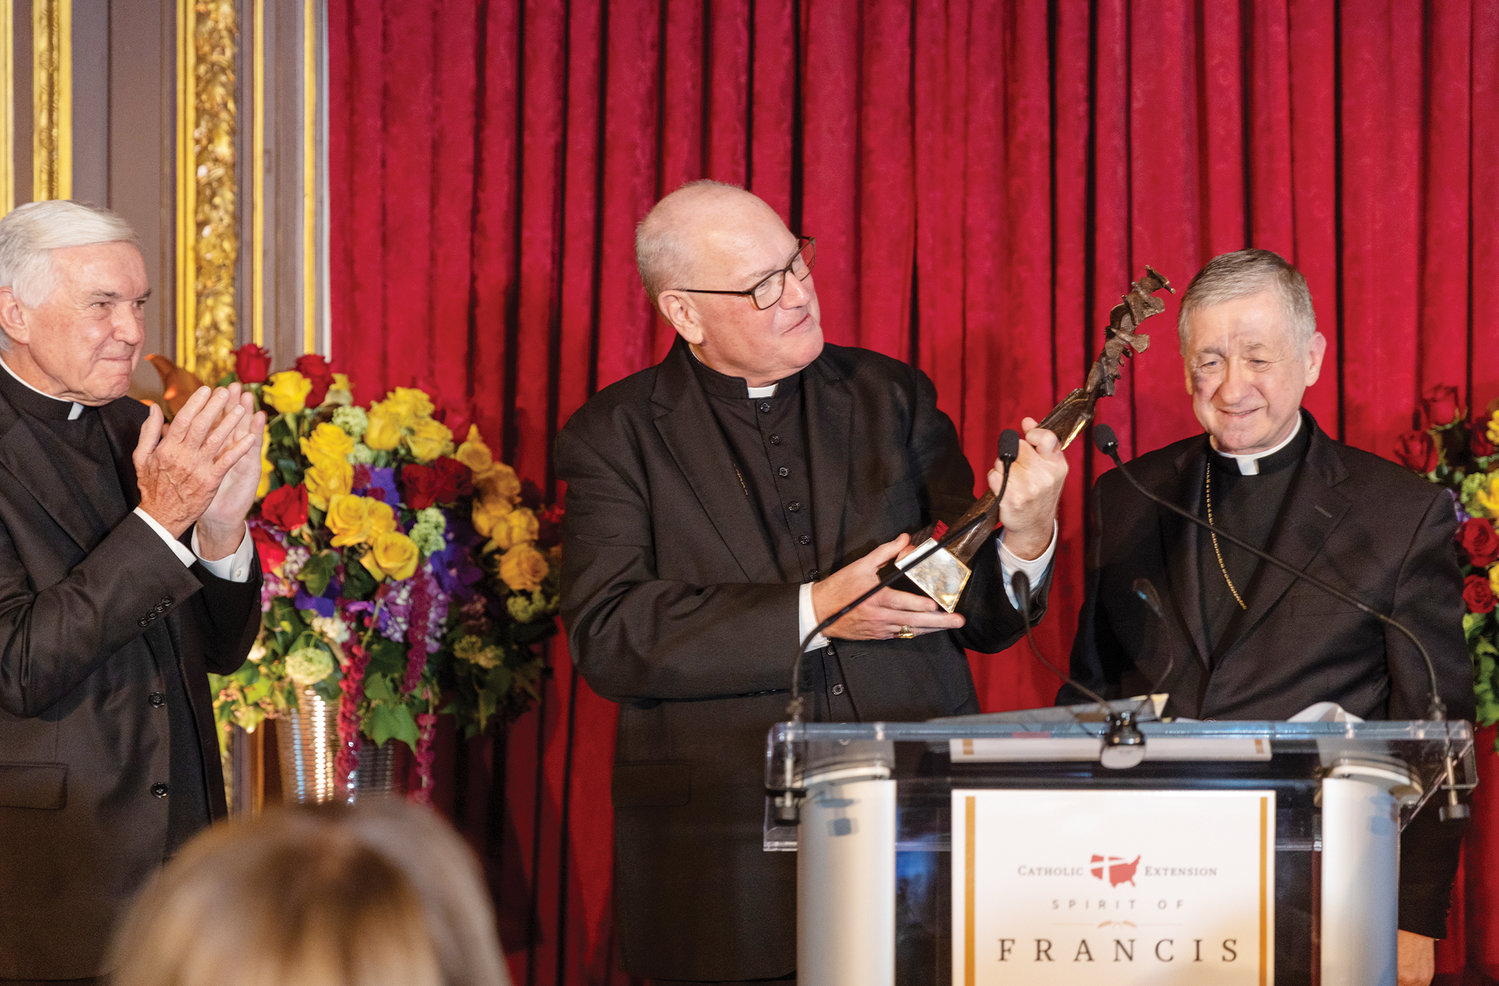 Cardinal Dolan accepts the Spirit of Francis honor Nov. 30 at the award dinner of Catholic Extension Society at the Metropolitan Club in Manhattan. At left is Father Jack Wall, president of Catholic Extension, and at right is Cardinal Blase J. Cupich of Chicago, who is chancellor of Catholic Extension. Cardinal Dolan was honored for his solidarity with the Church in Cuba and his “advocacy for the weak and marginalized.”